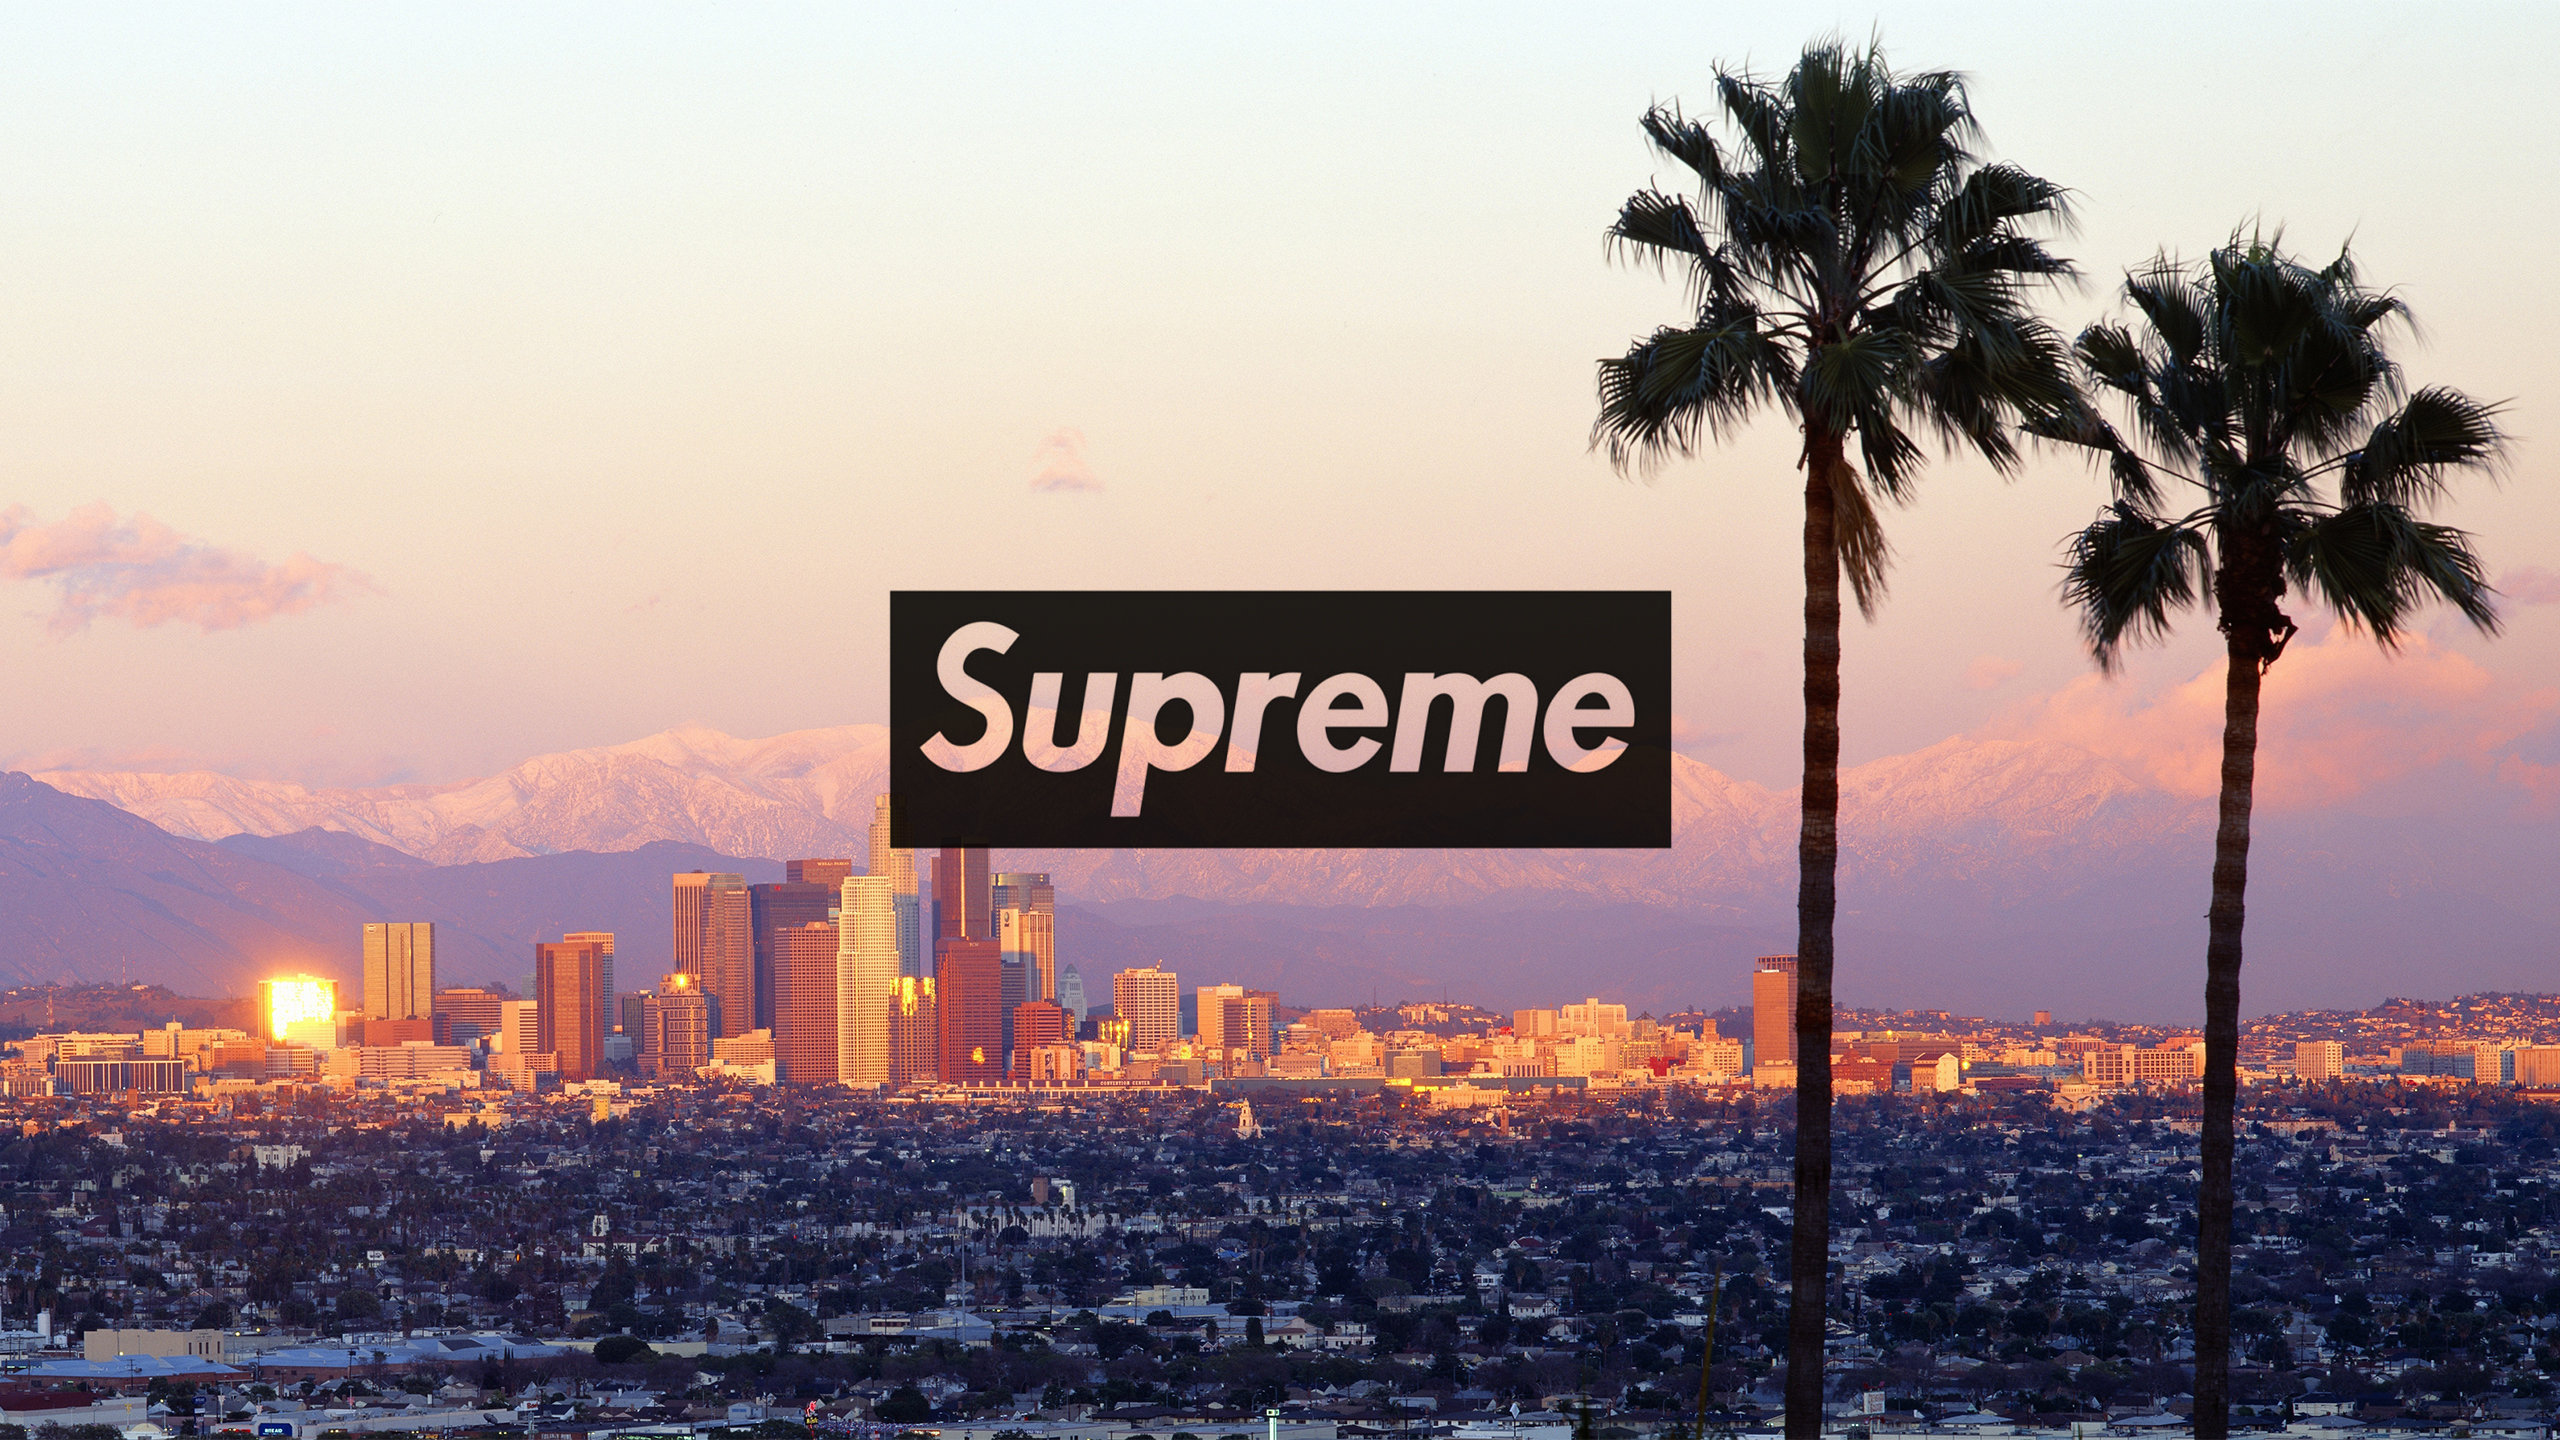 Supreme Laptop Wallpaper For Your